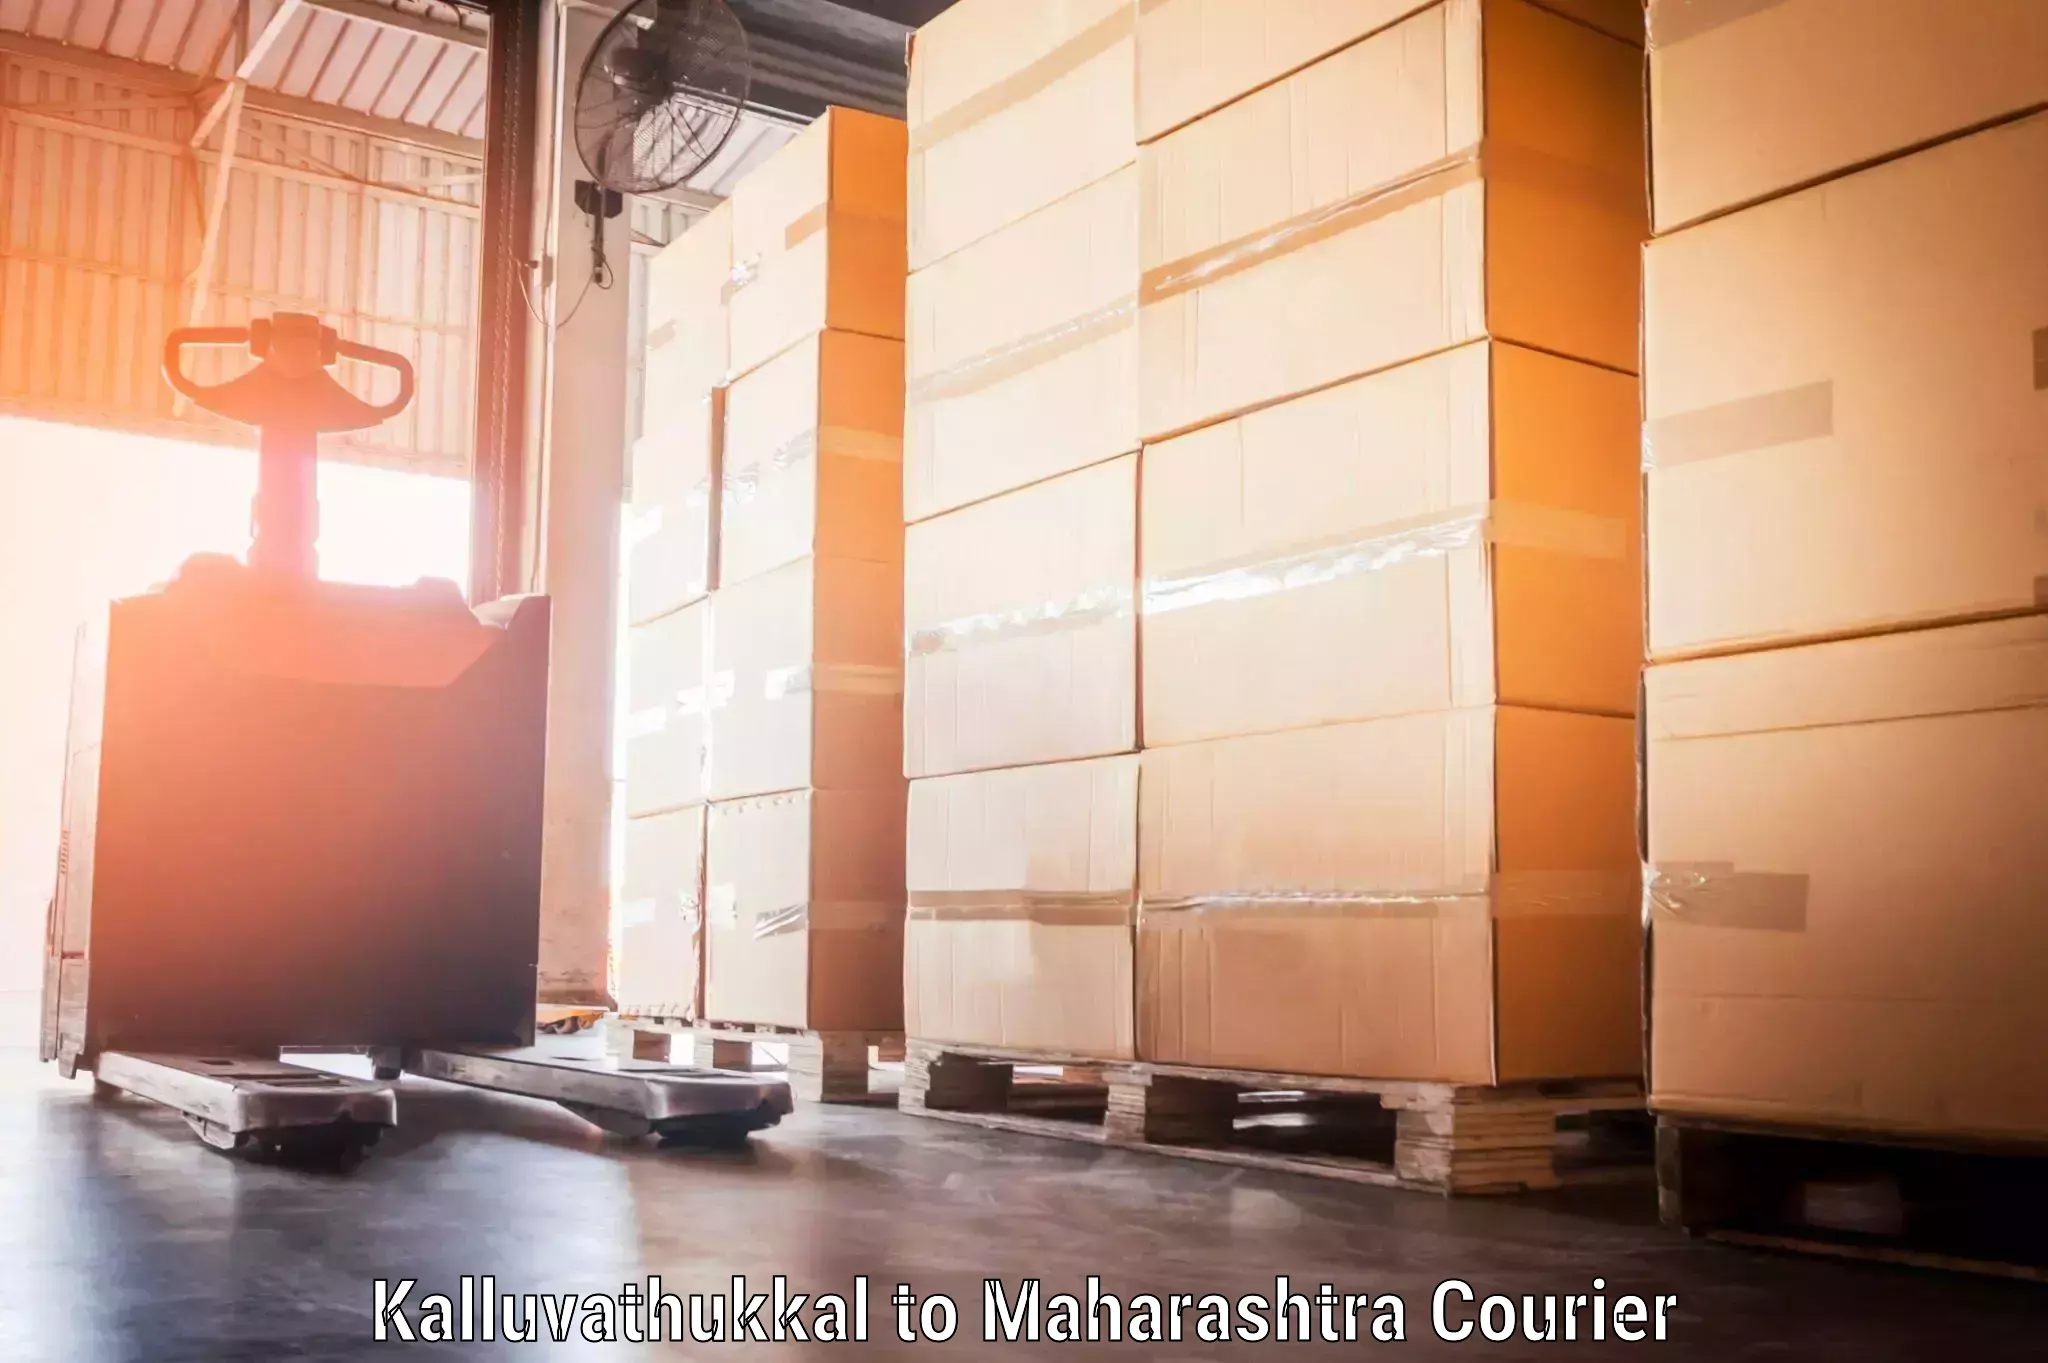 Baggage shipping service Kalluvathukkal to Nanded